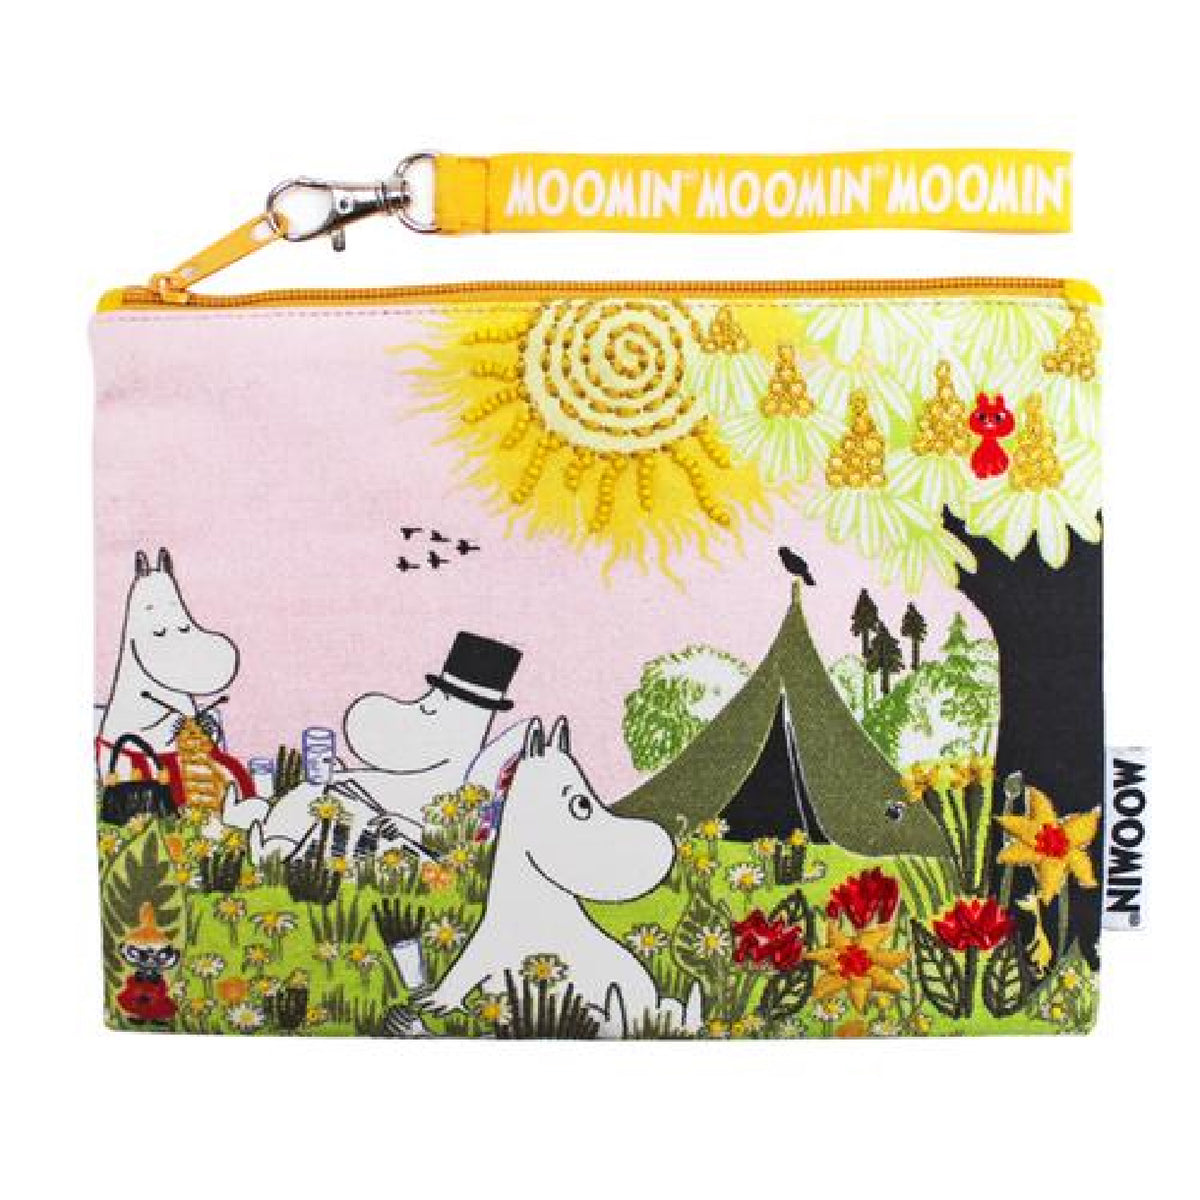 Mummi Stor Pouch Camping House Of Disaster